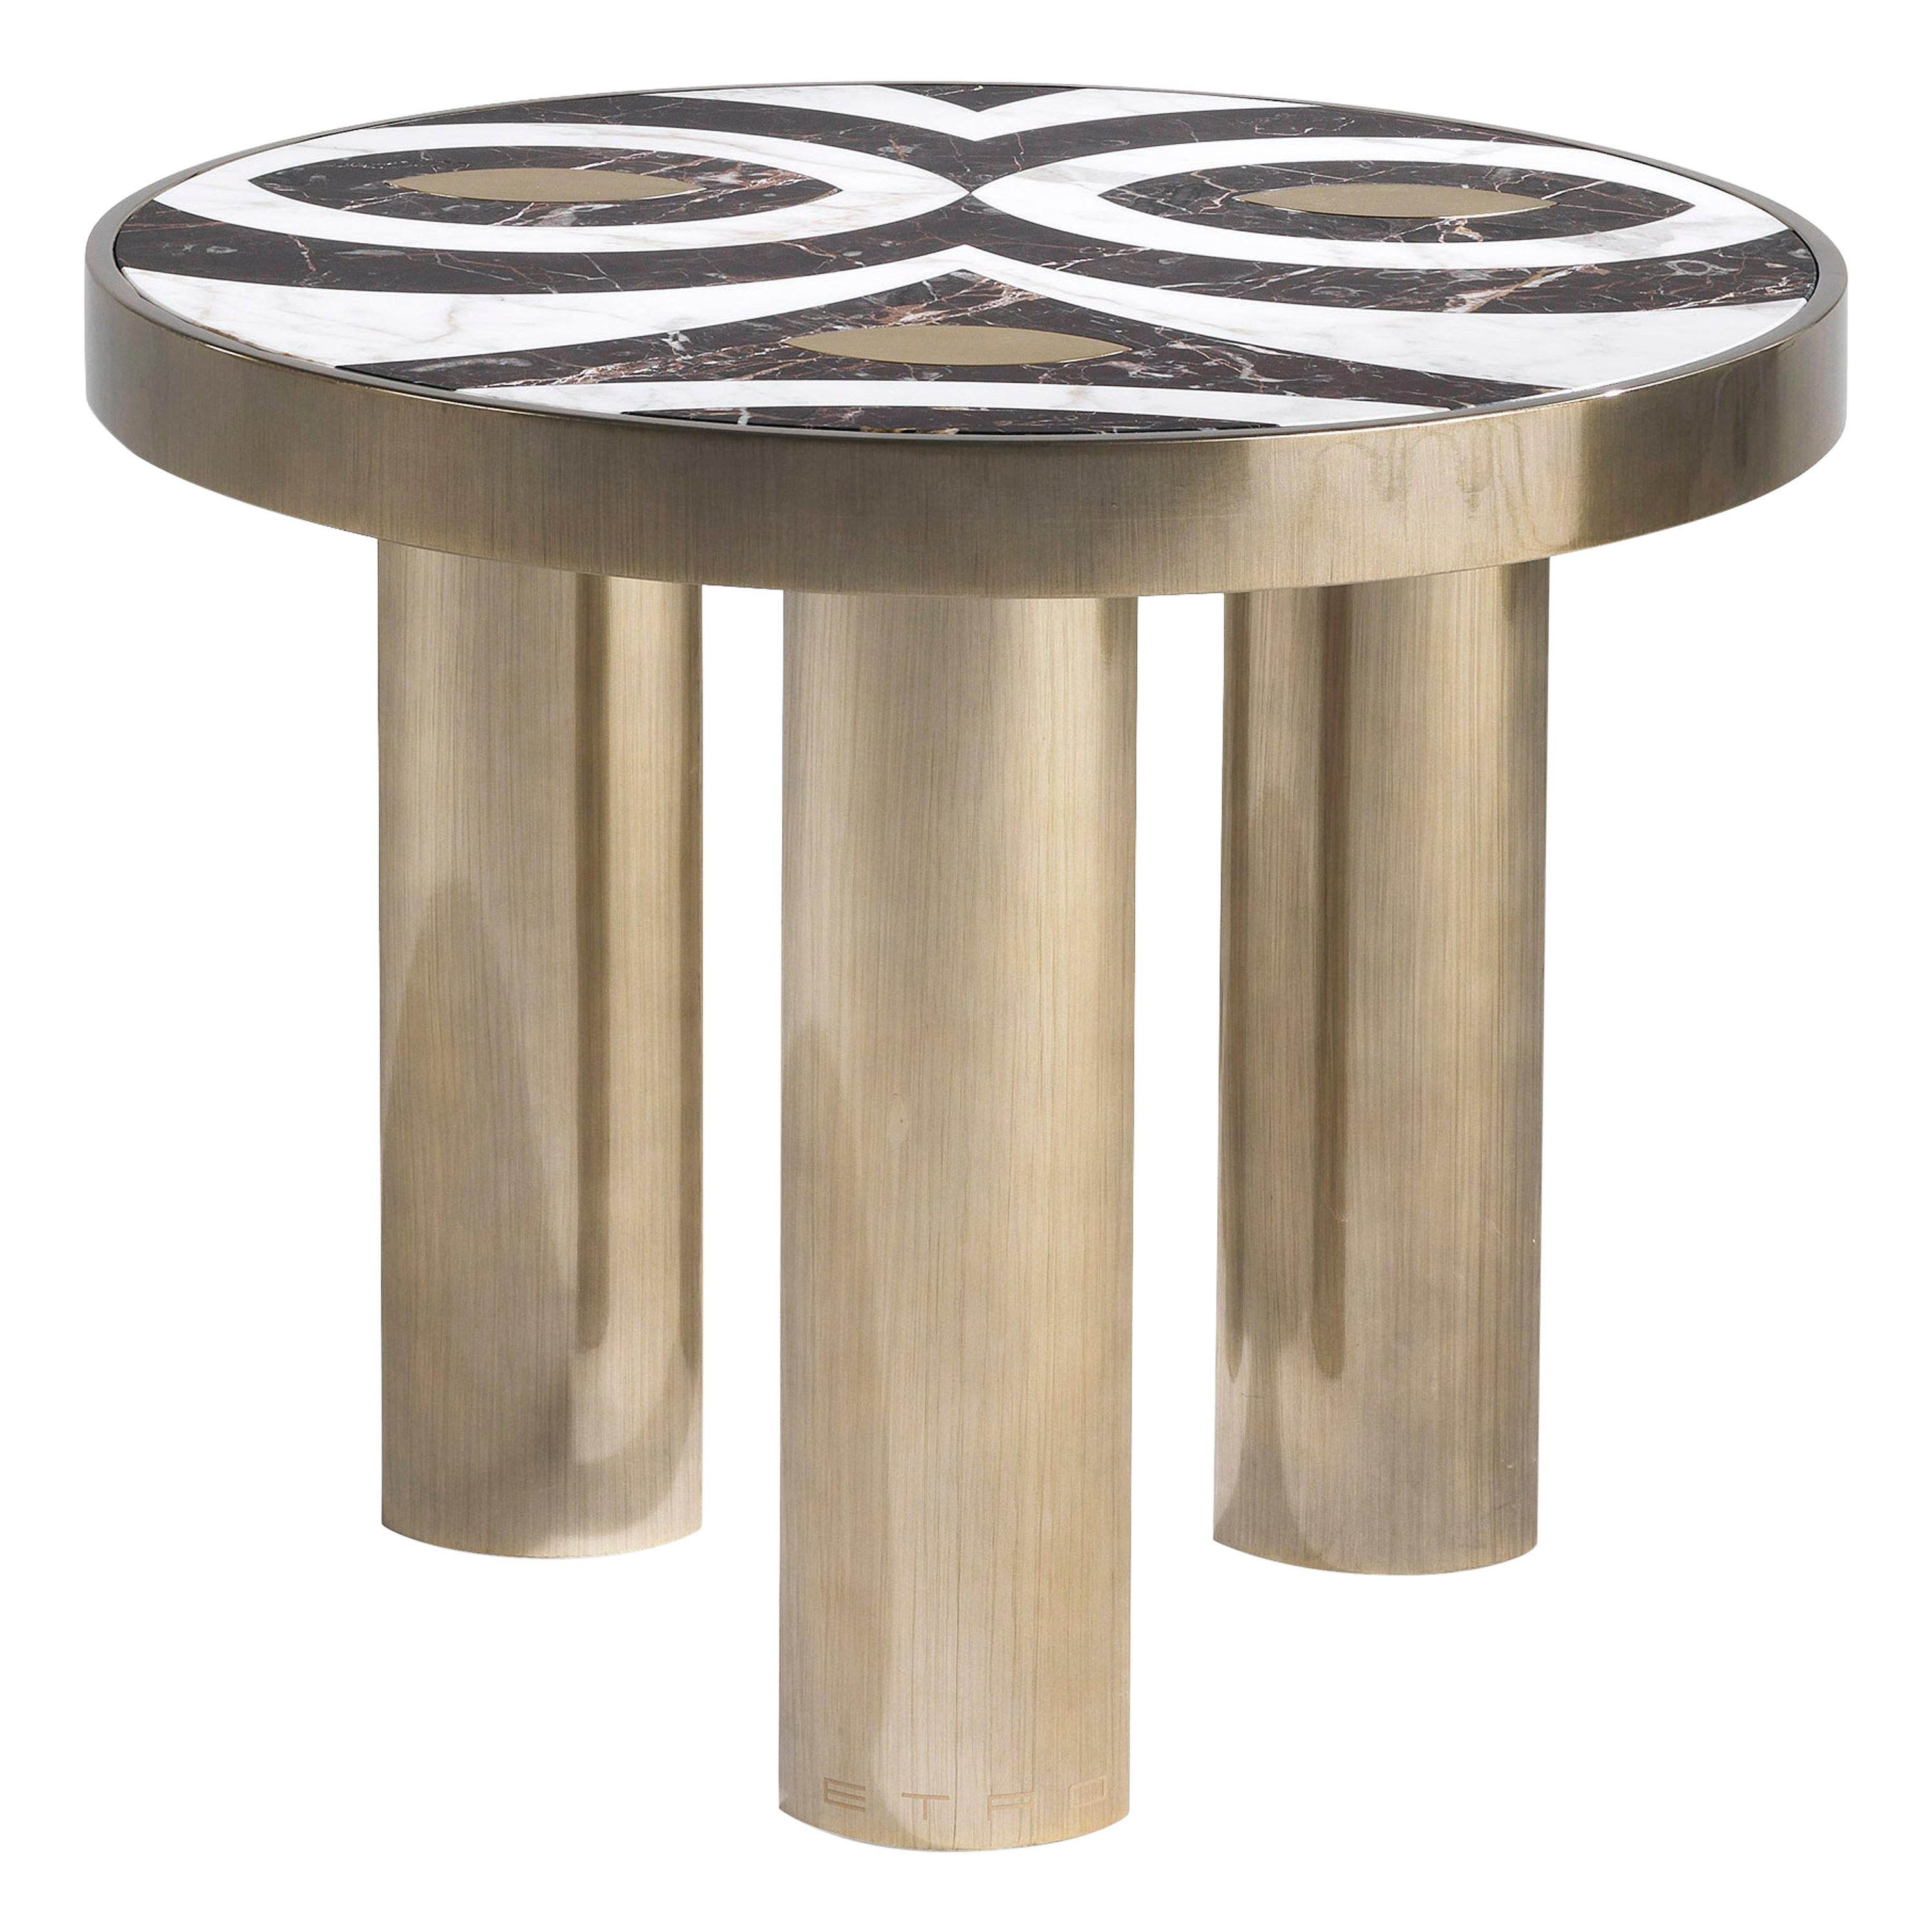 21st Century Akan Small Table in Marble and Wood by Etro Home Interiors